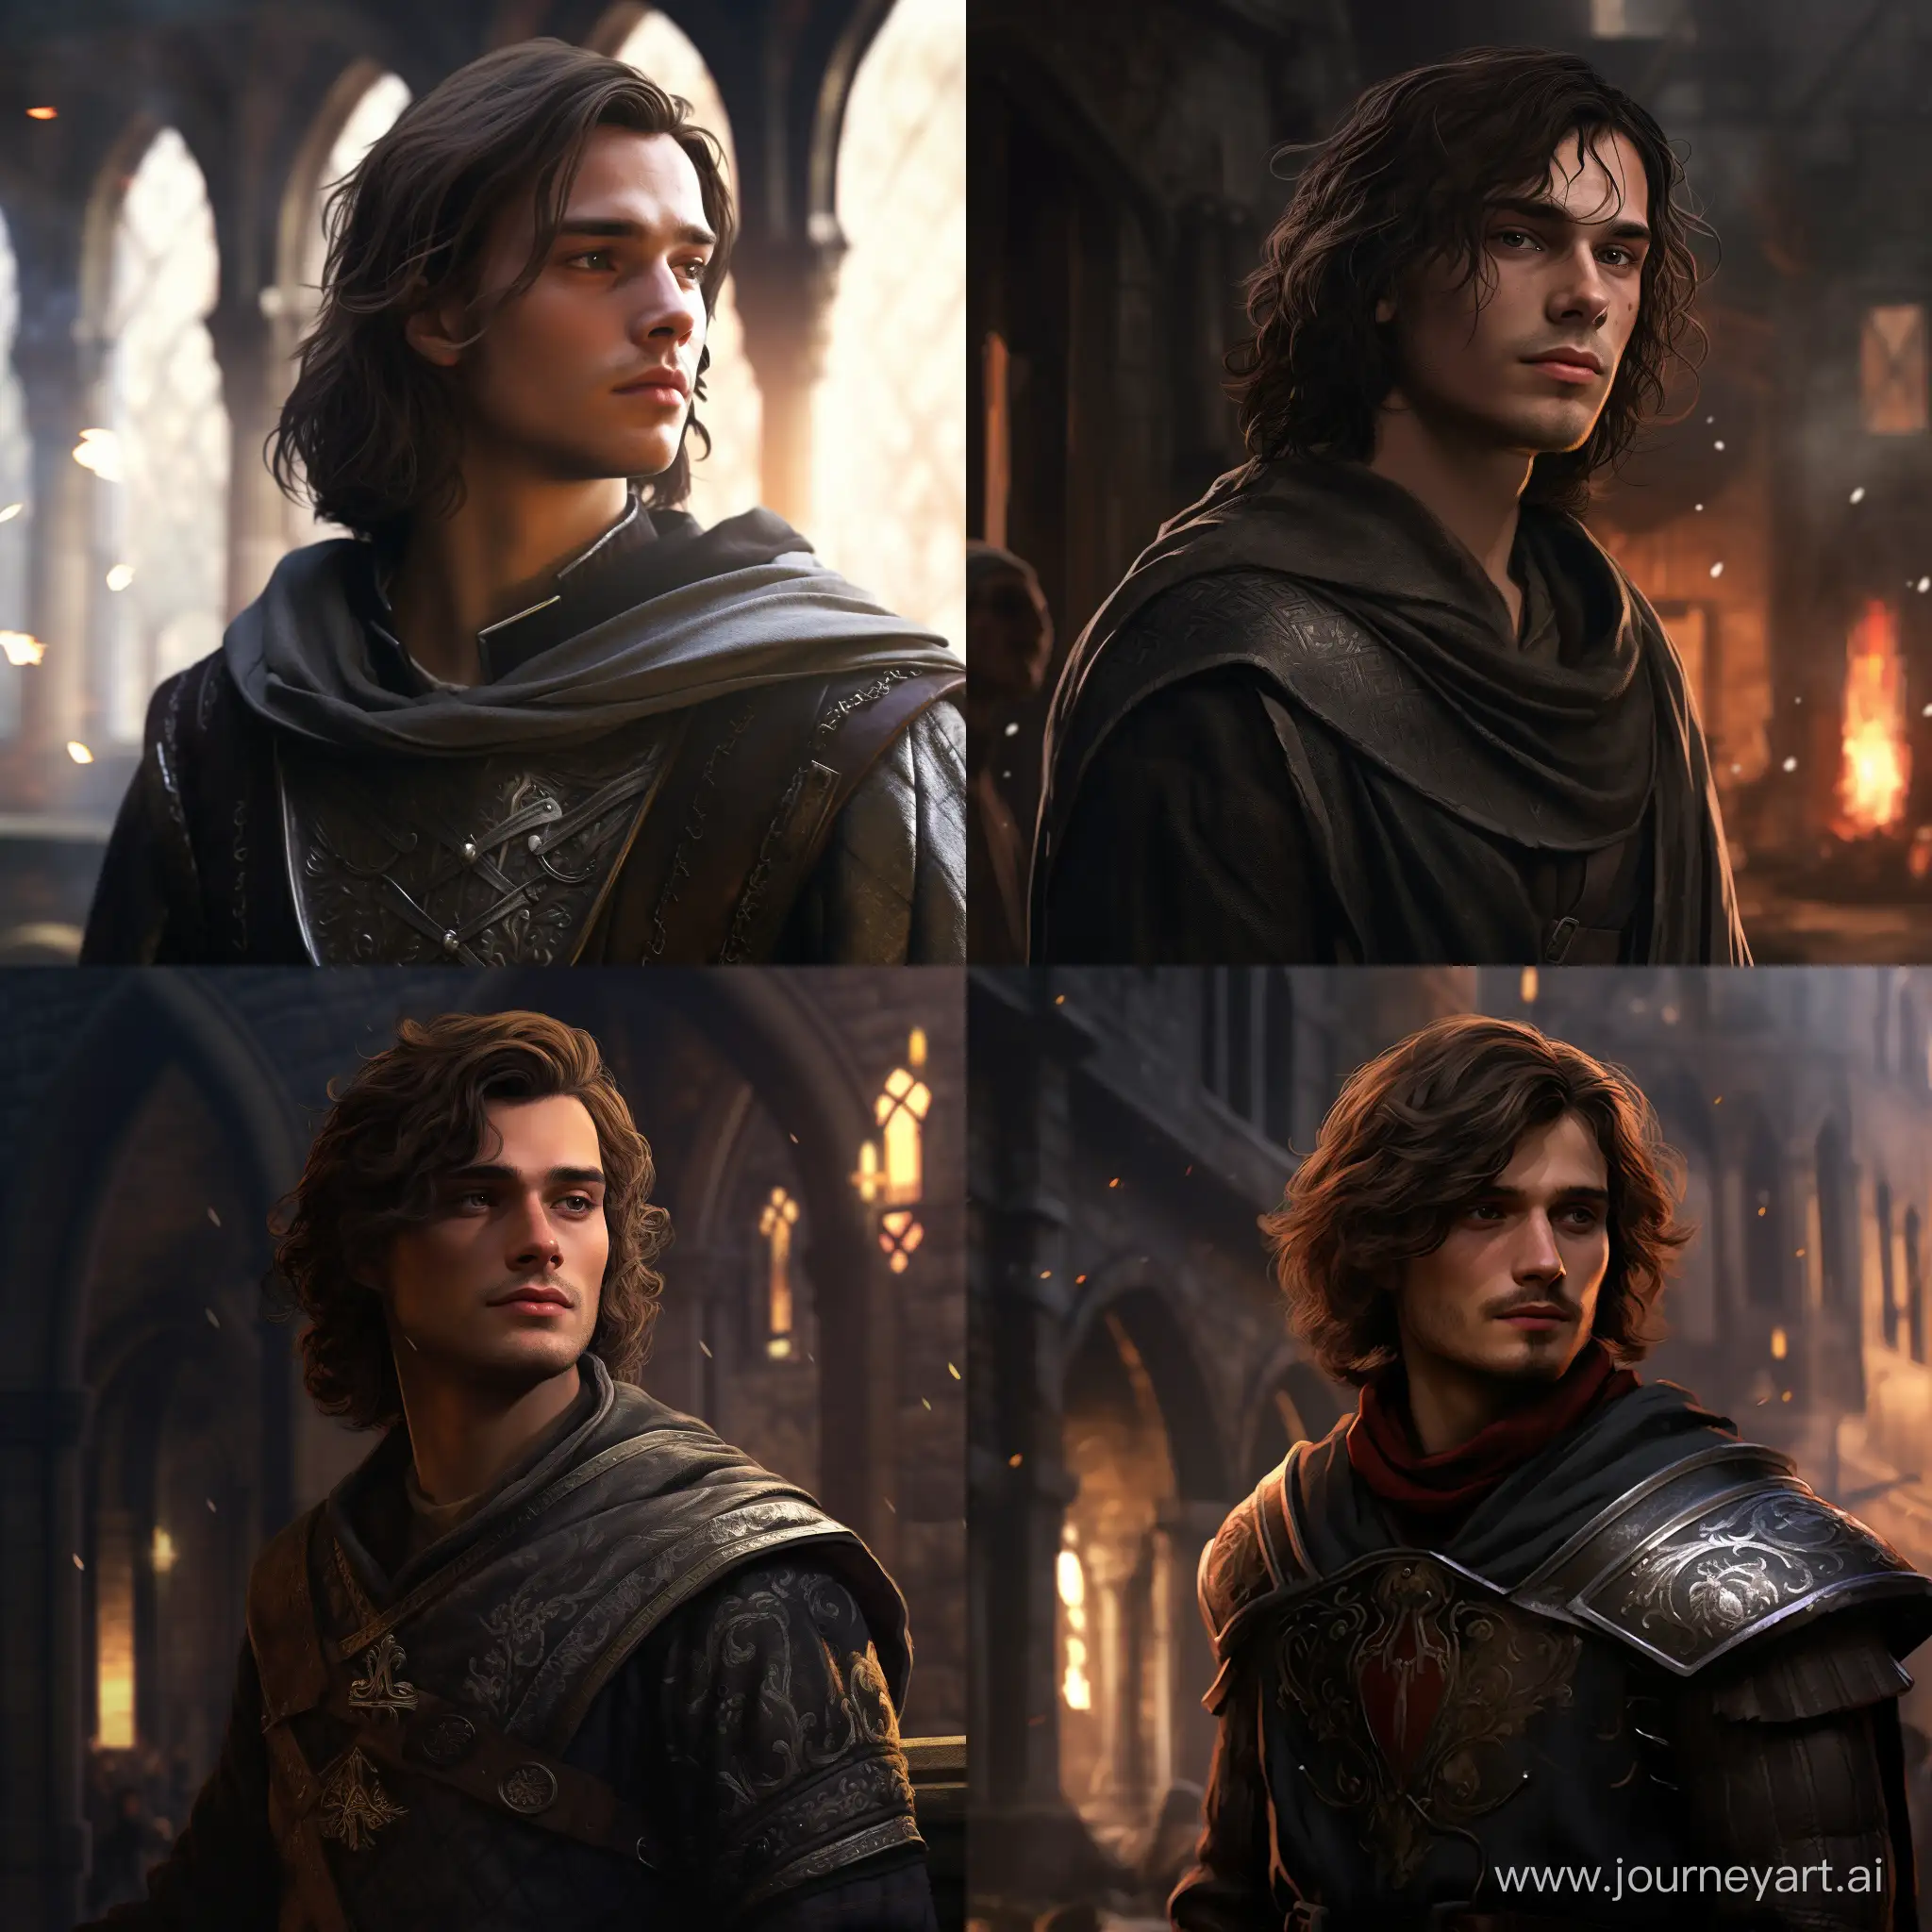 Medieval viceroy's son, 22 years old, wrinkles on face, long brown hair, no beard, transparent large crystal emitting a light black mist on the left and on the right, a black mist hanging around the neck, round nose, medieval city, fantasy, realistic, digital art, 4k, fantasy